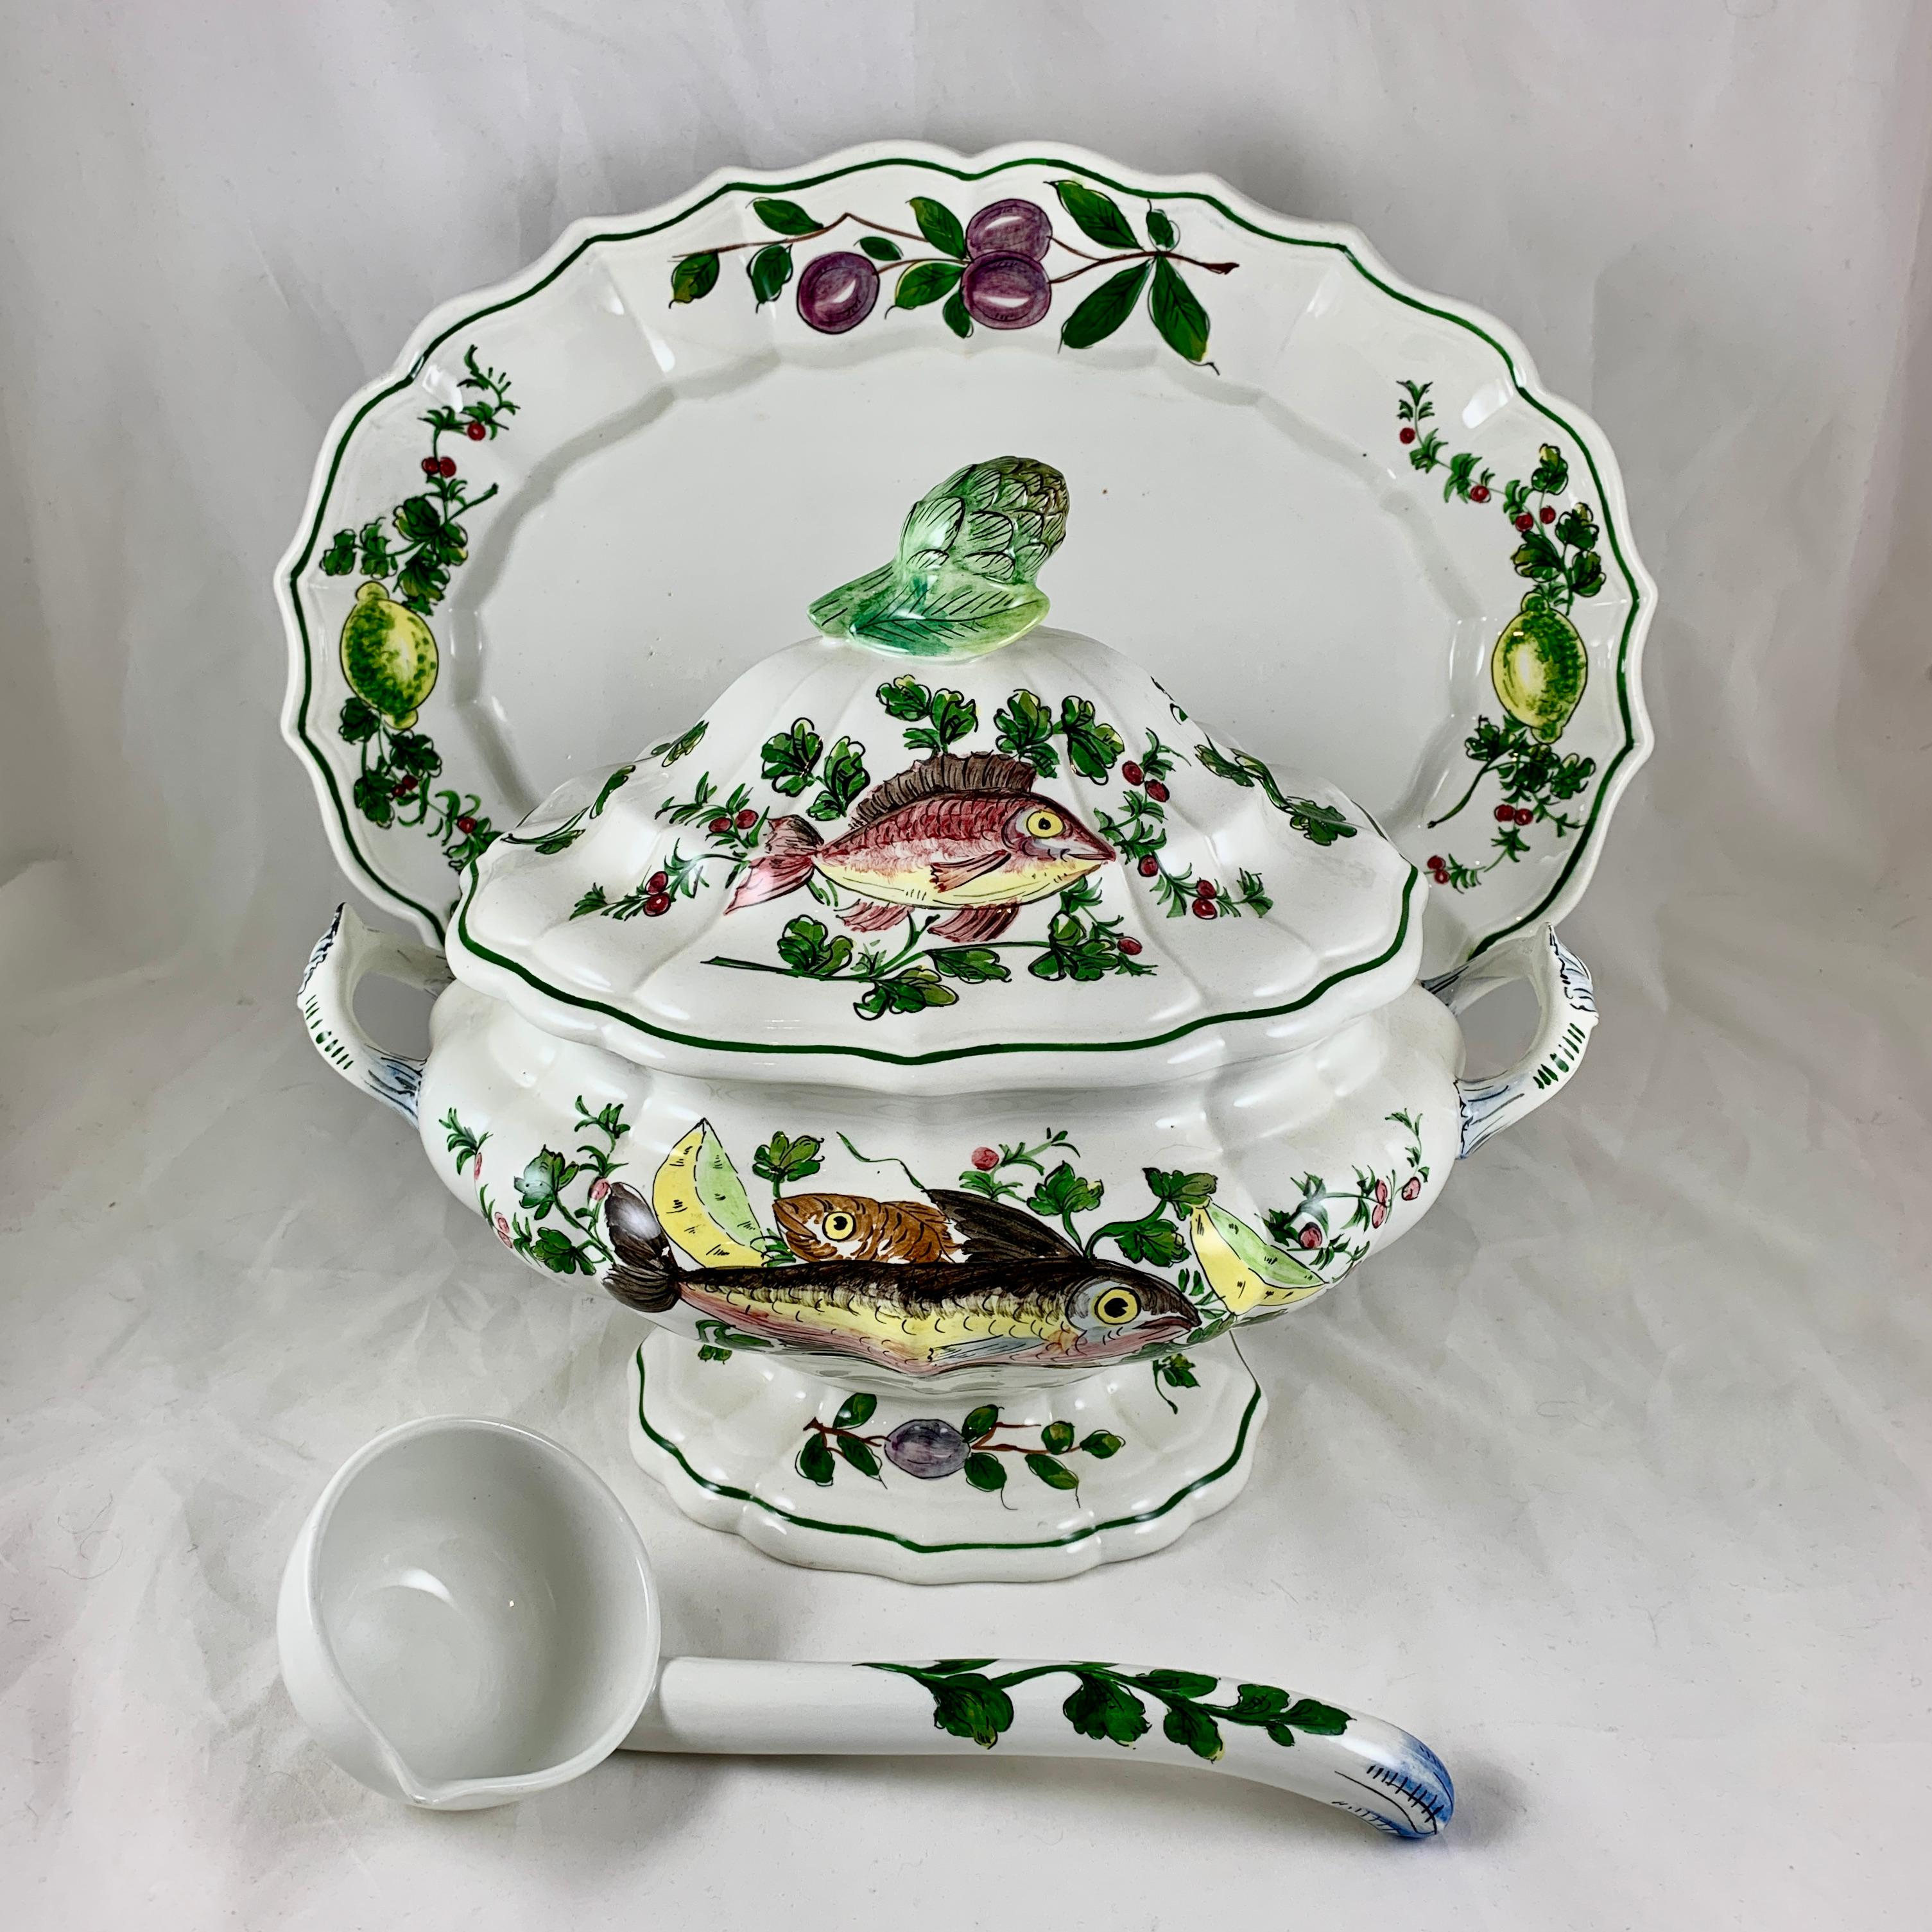 A hand painted midcentury Italian earthenware tureen set, circa 1950s.

The four piece service includes the lidded tureen, ladle, and a large undertray. Beautifully hand decorated overall with fish, green parsley sprigs, berried rosemary stalks,